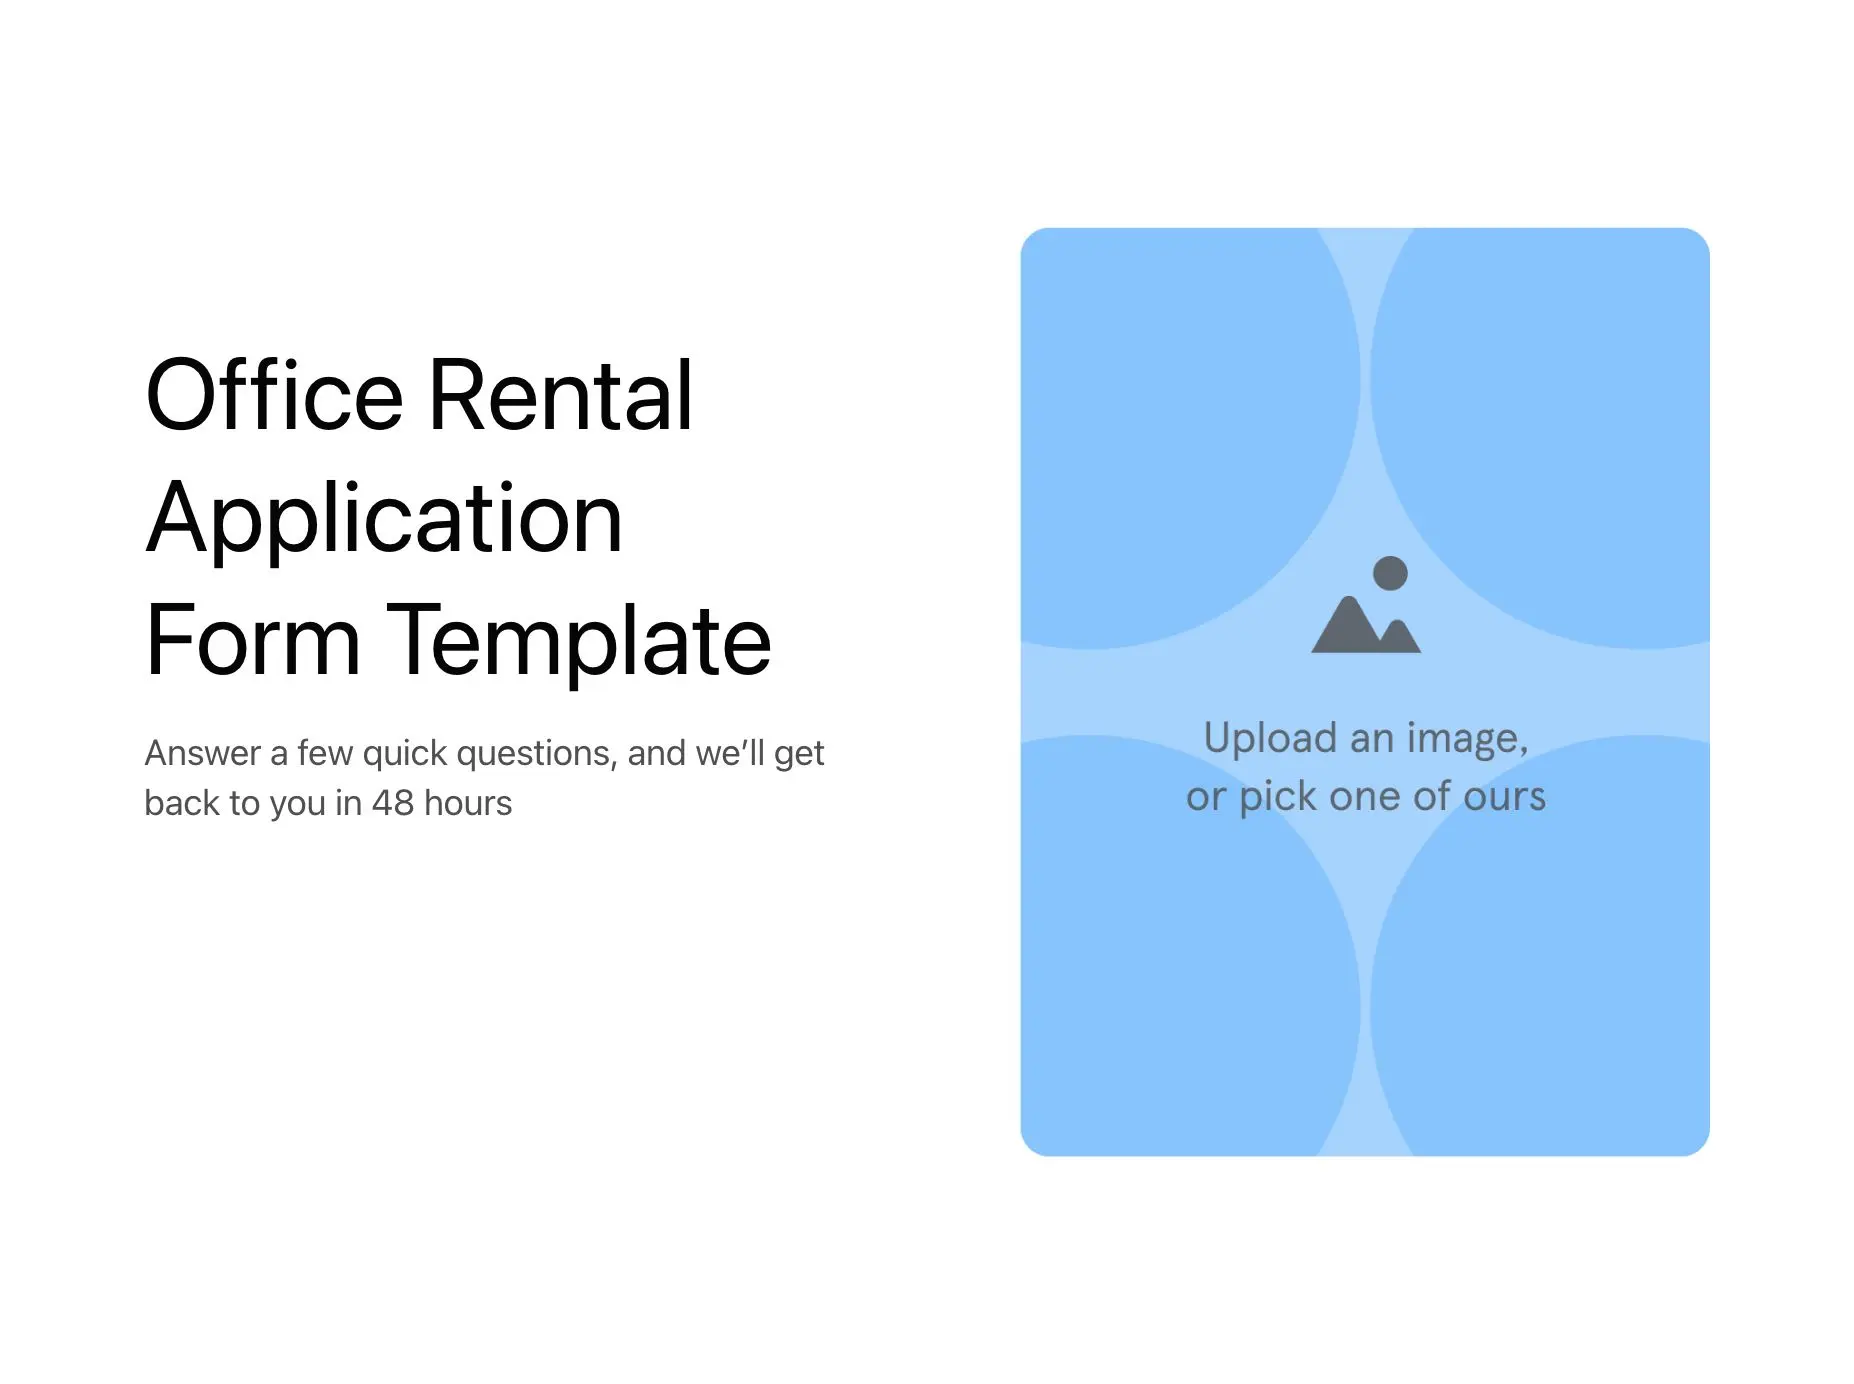 Office Rental Application Form Template Hero